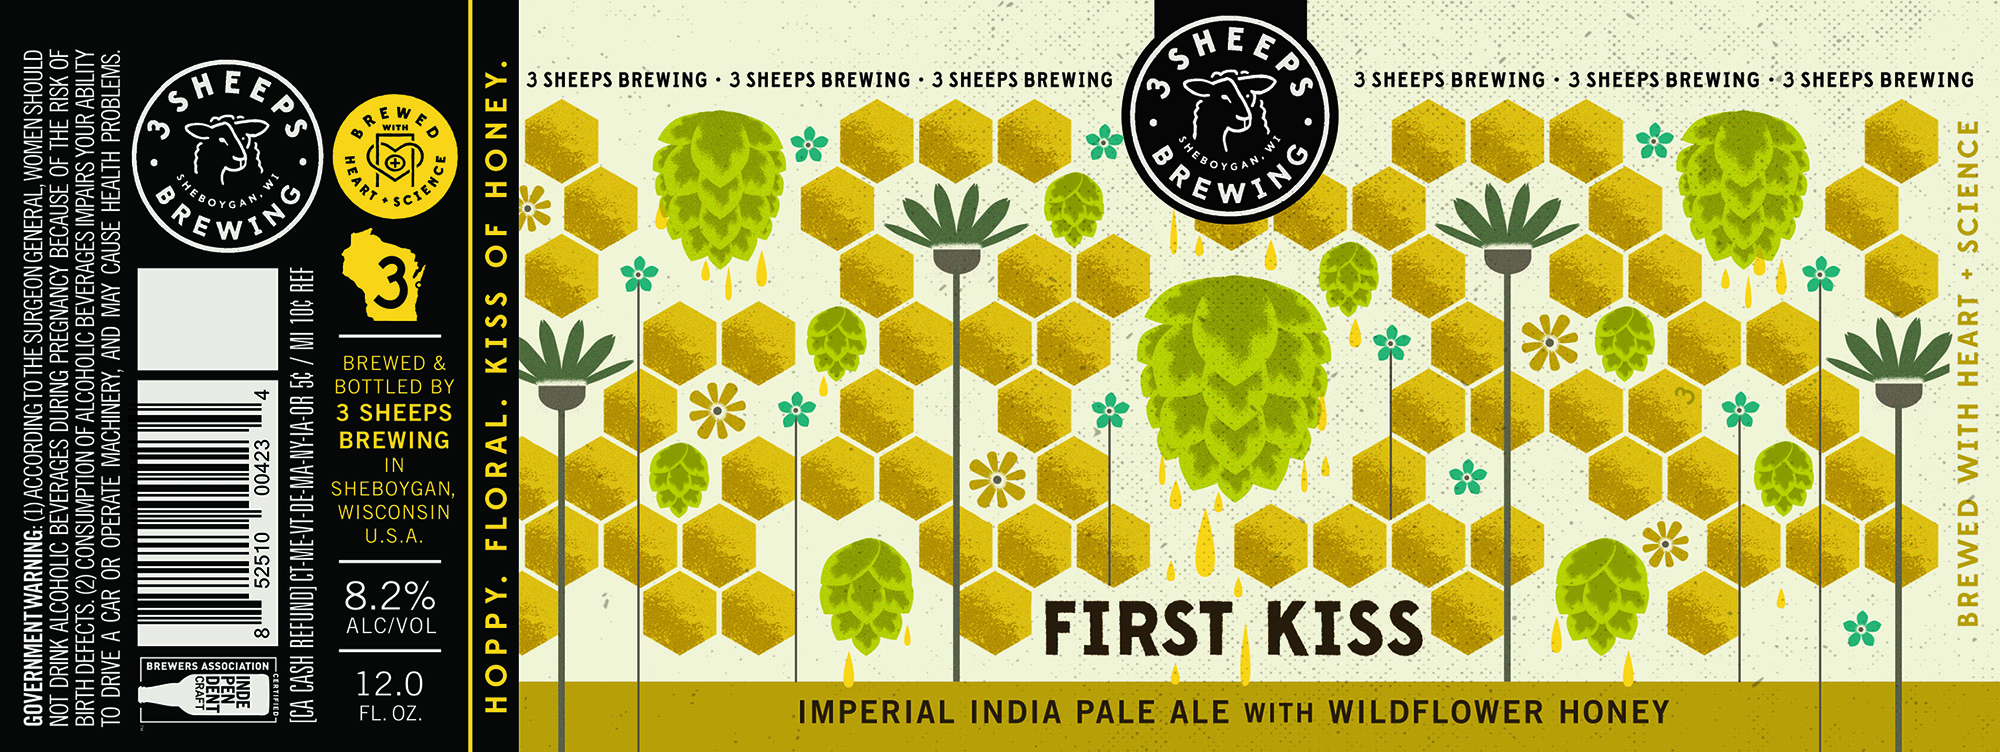 3 Sheeps Brewing Company's First Kiss